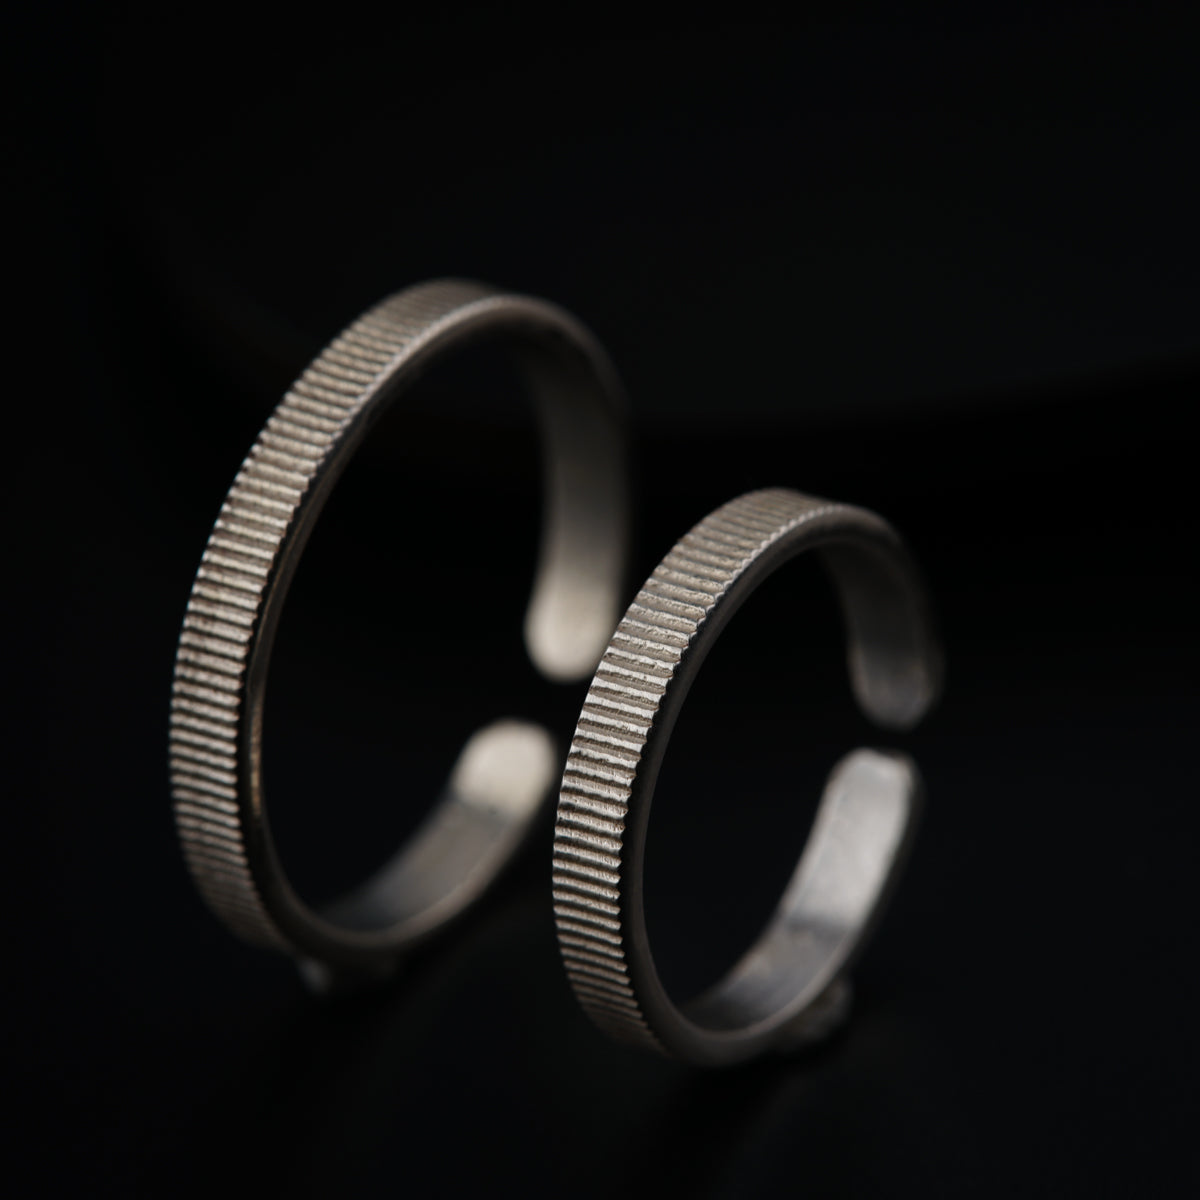 two silver rings sitting next to each other on a black surface